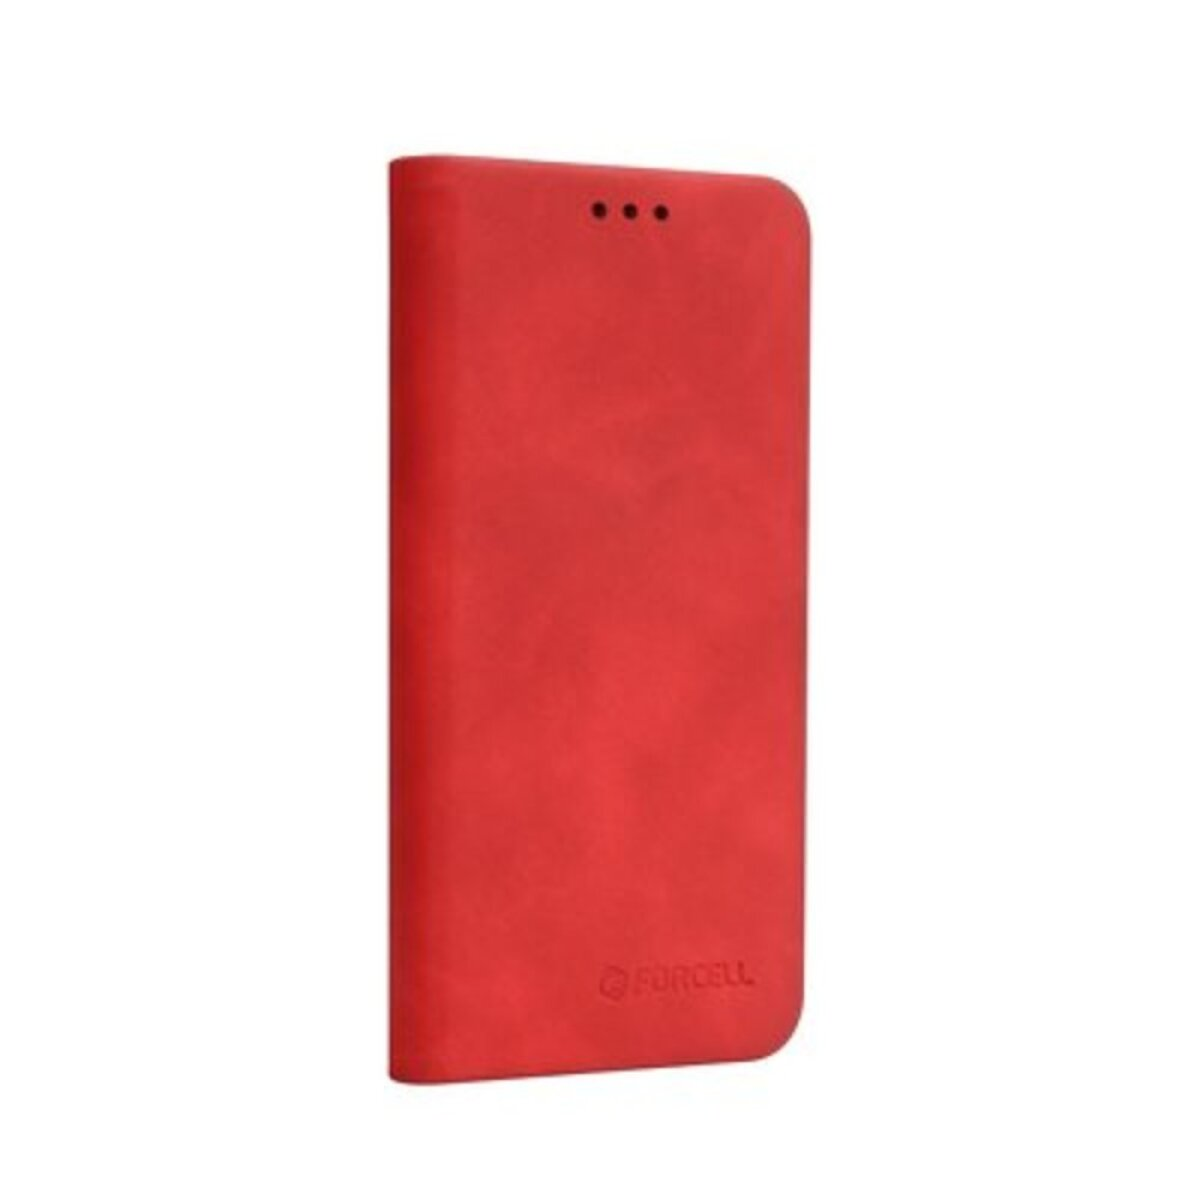 FORCELL SILK Case rot, Bookcover, Rot J6+ Galaxy Universal, Universal